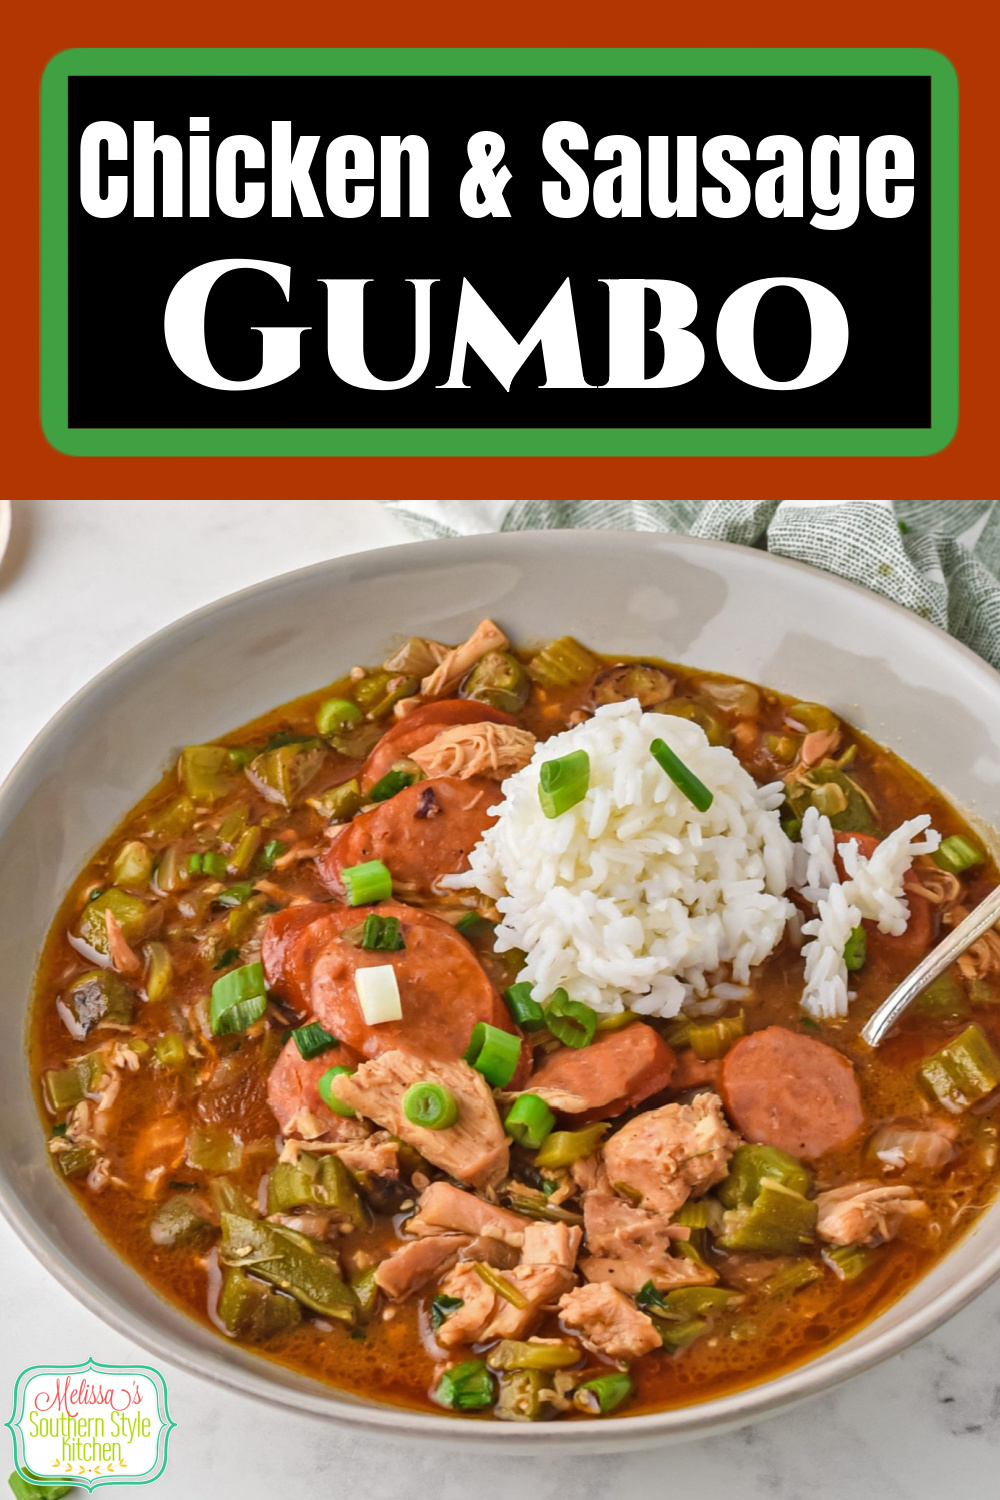 Top a big bowl of Chicken and Sausage Gumbo with a scoop of rice then add a side of cornbread for a taste of the South in your mouth.  #gumbo #NOLArecipes #neworleansgumbo #cajunrecipes #creolerecipes #mardisgrasrecipes #easychickenrecipes #andouillesausage #chickenandsaisagegumbo via @melissasssk